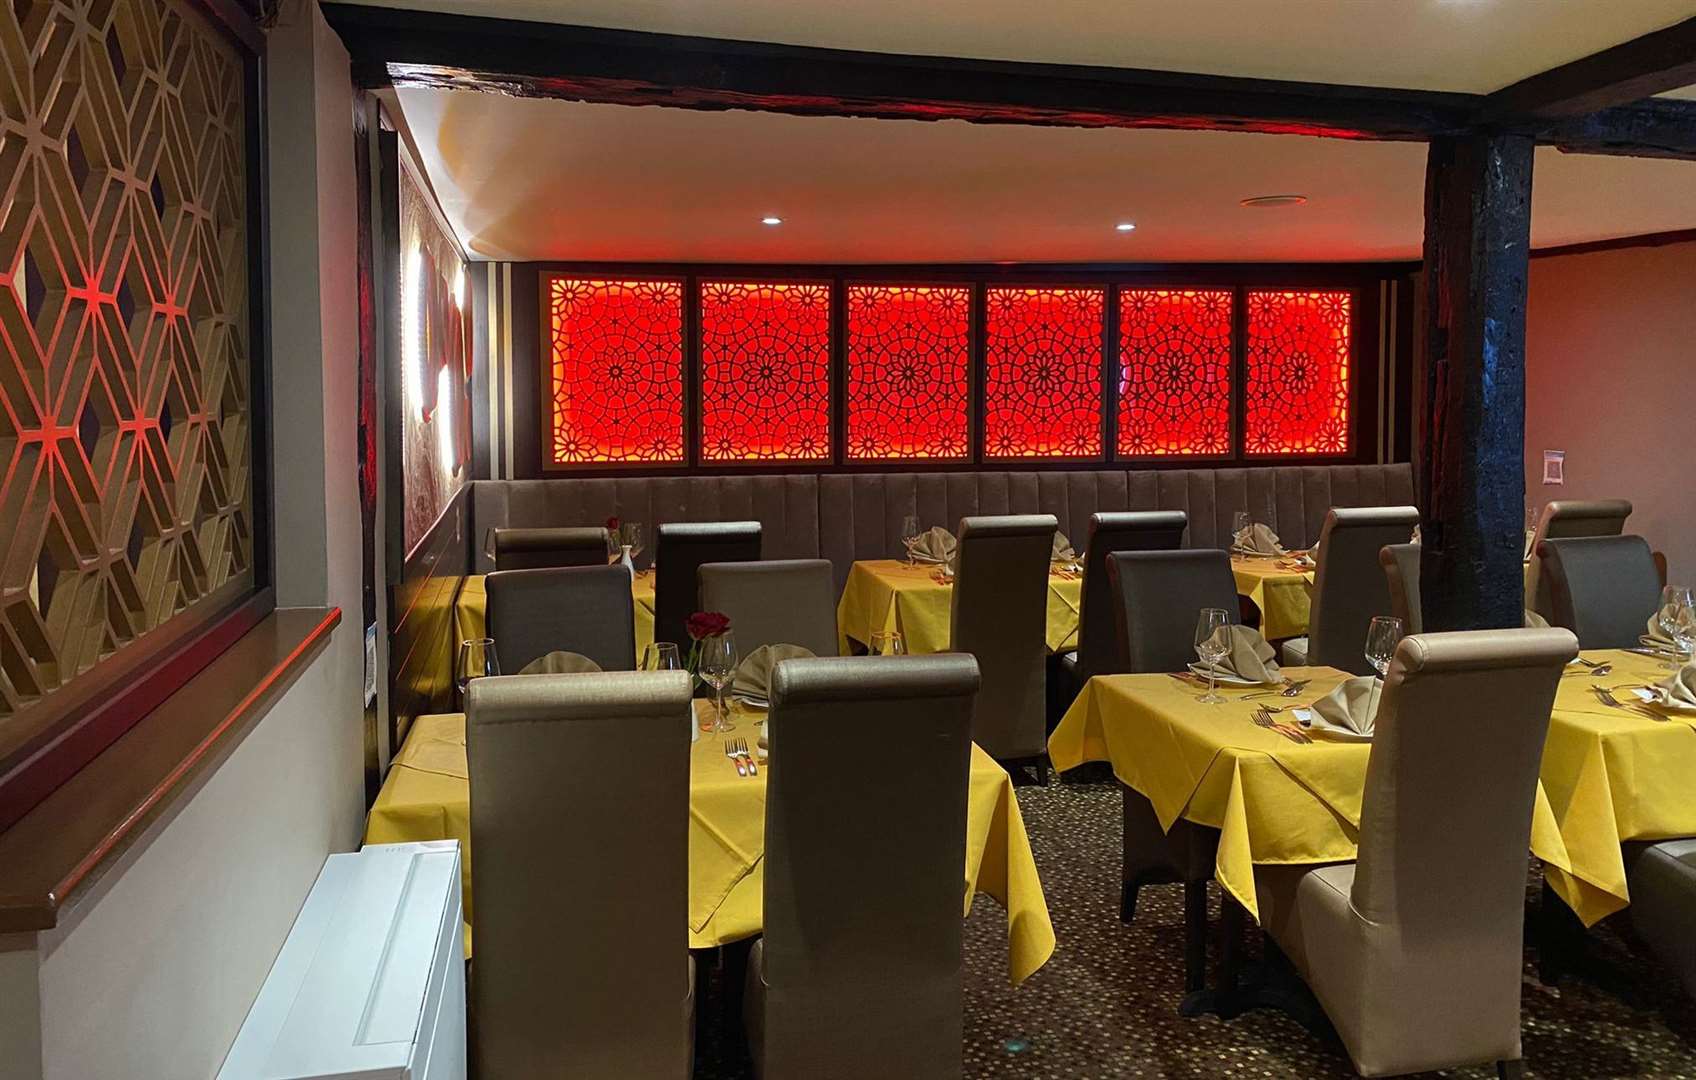 Inside Badsha Indian Cuisine after the renovations. Picture: Azad Suton